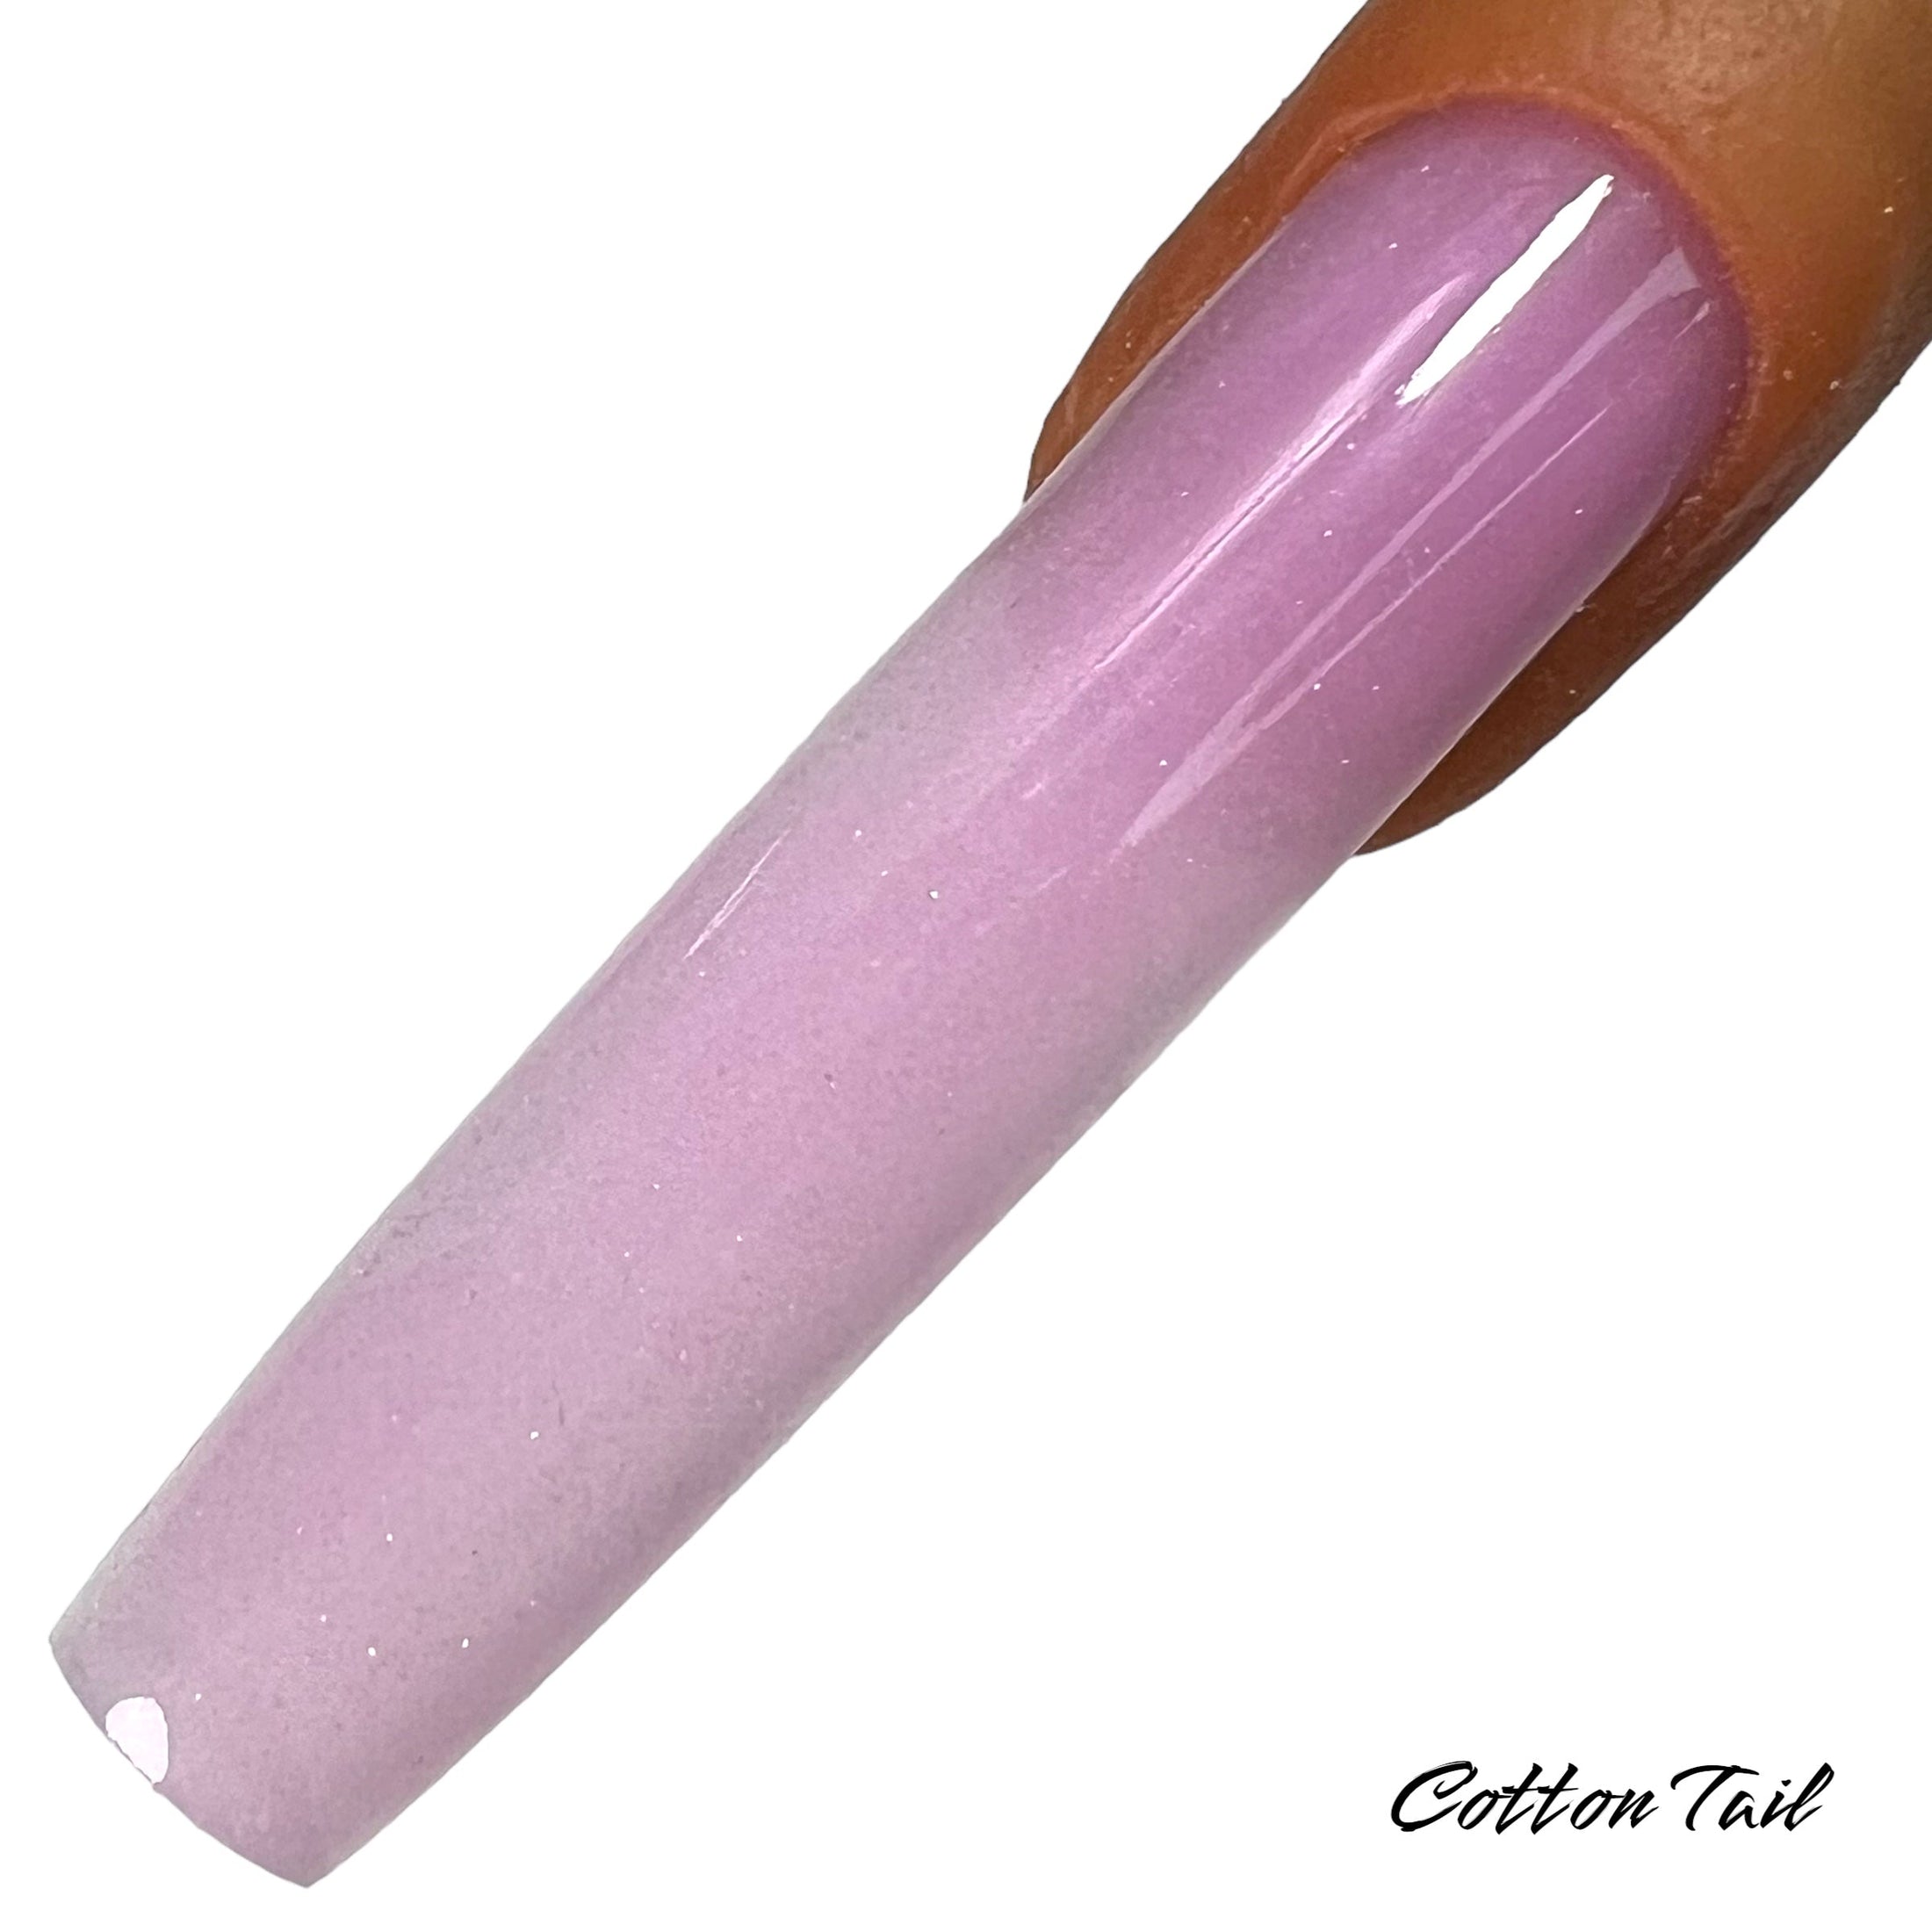 Cotton Tail • Foundation Acrylic • Refill